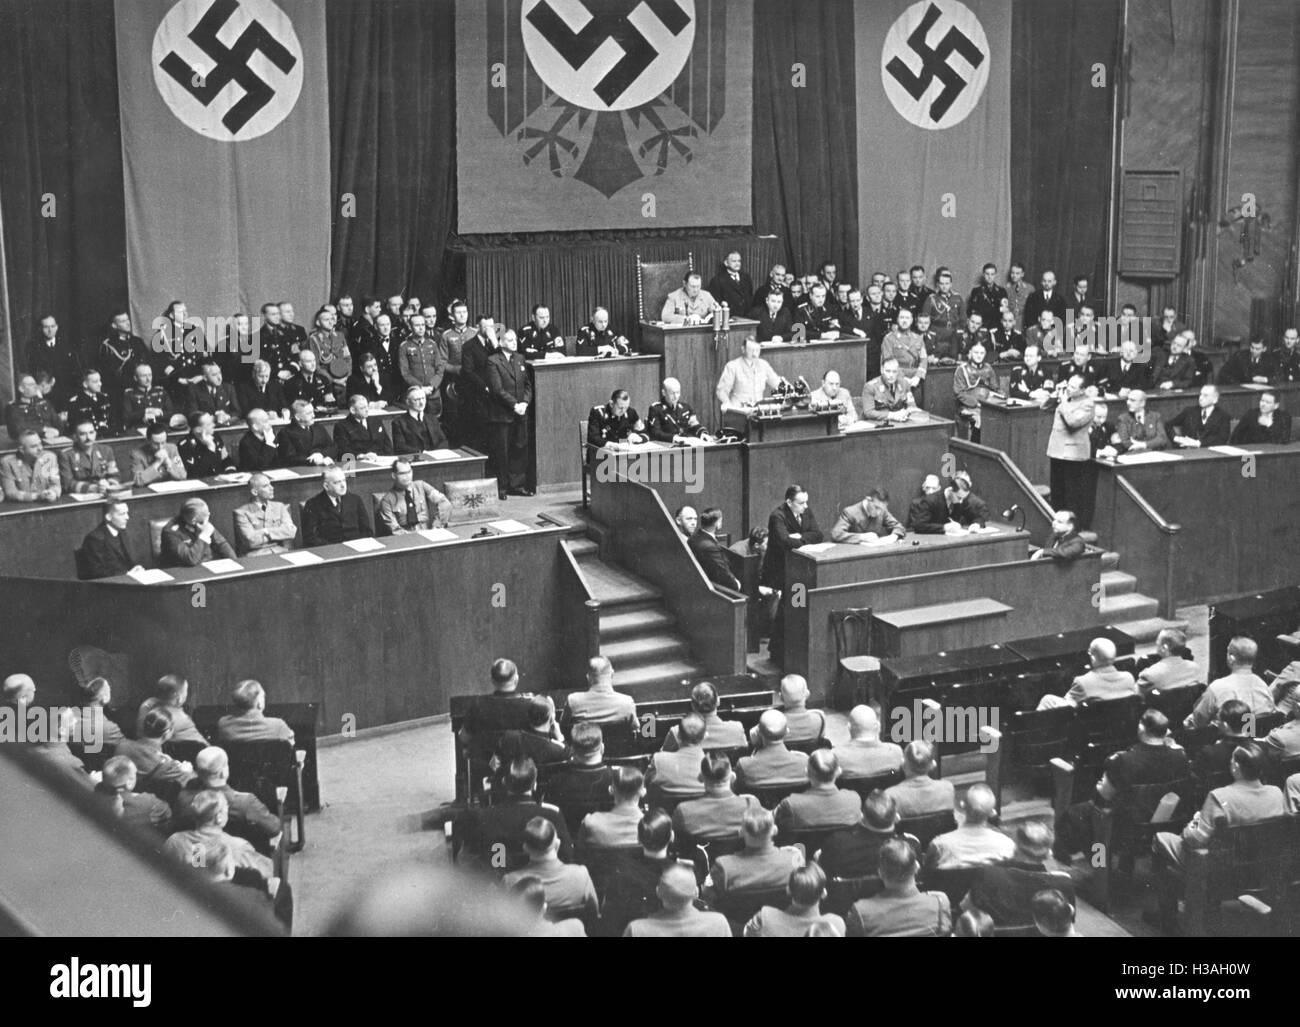 Hitler's speech before the Reichstag in the Kroll Opera House in Berlin, 1936 Stock Photo